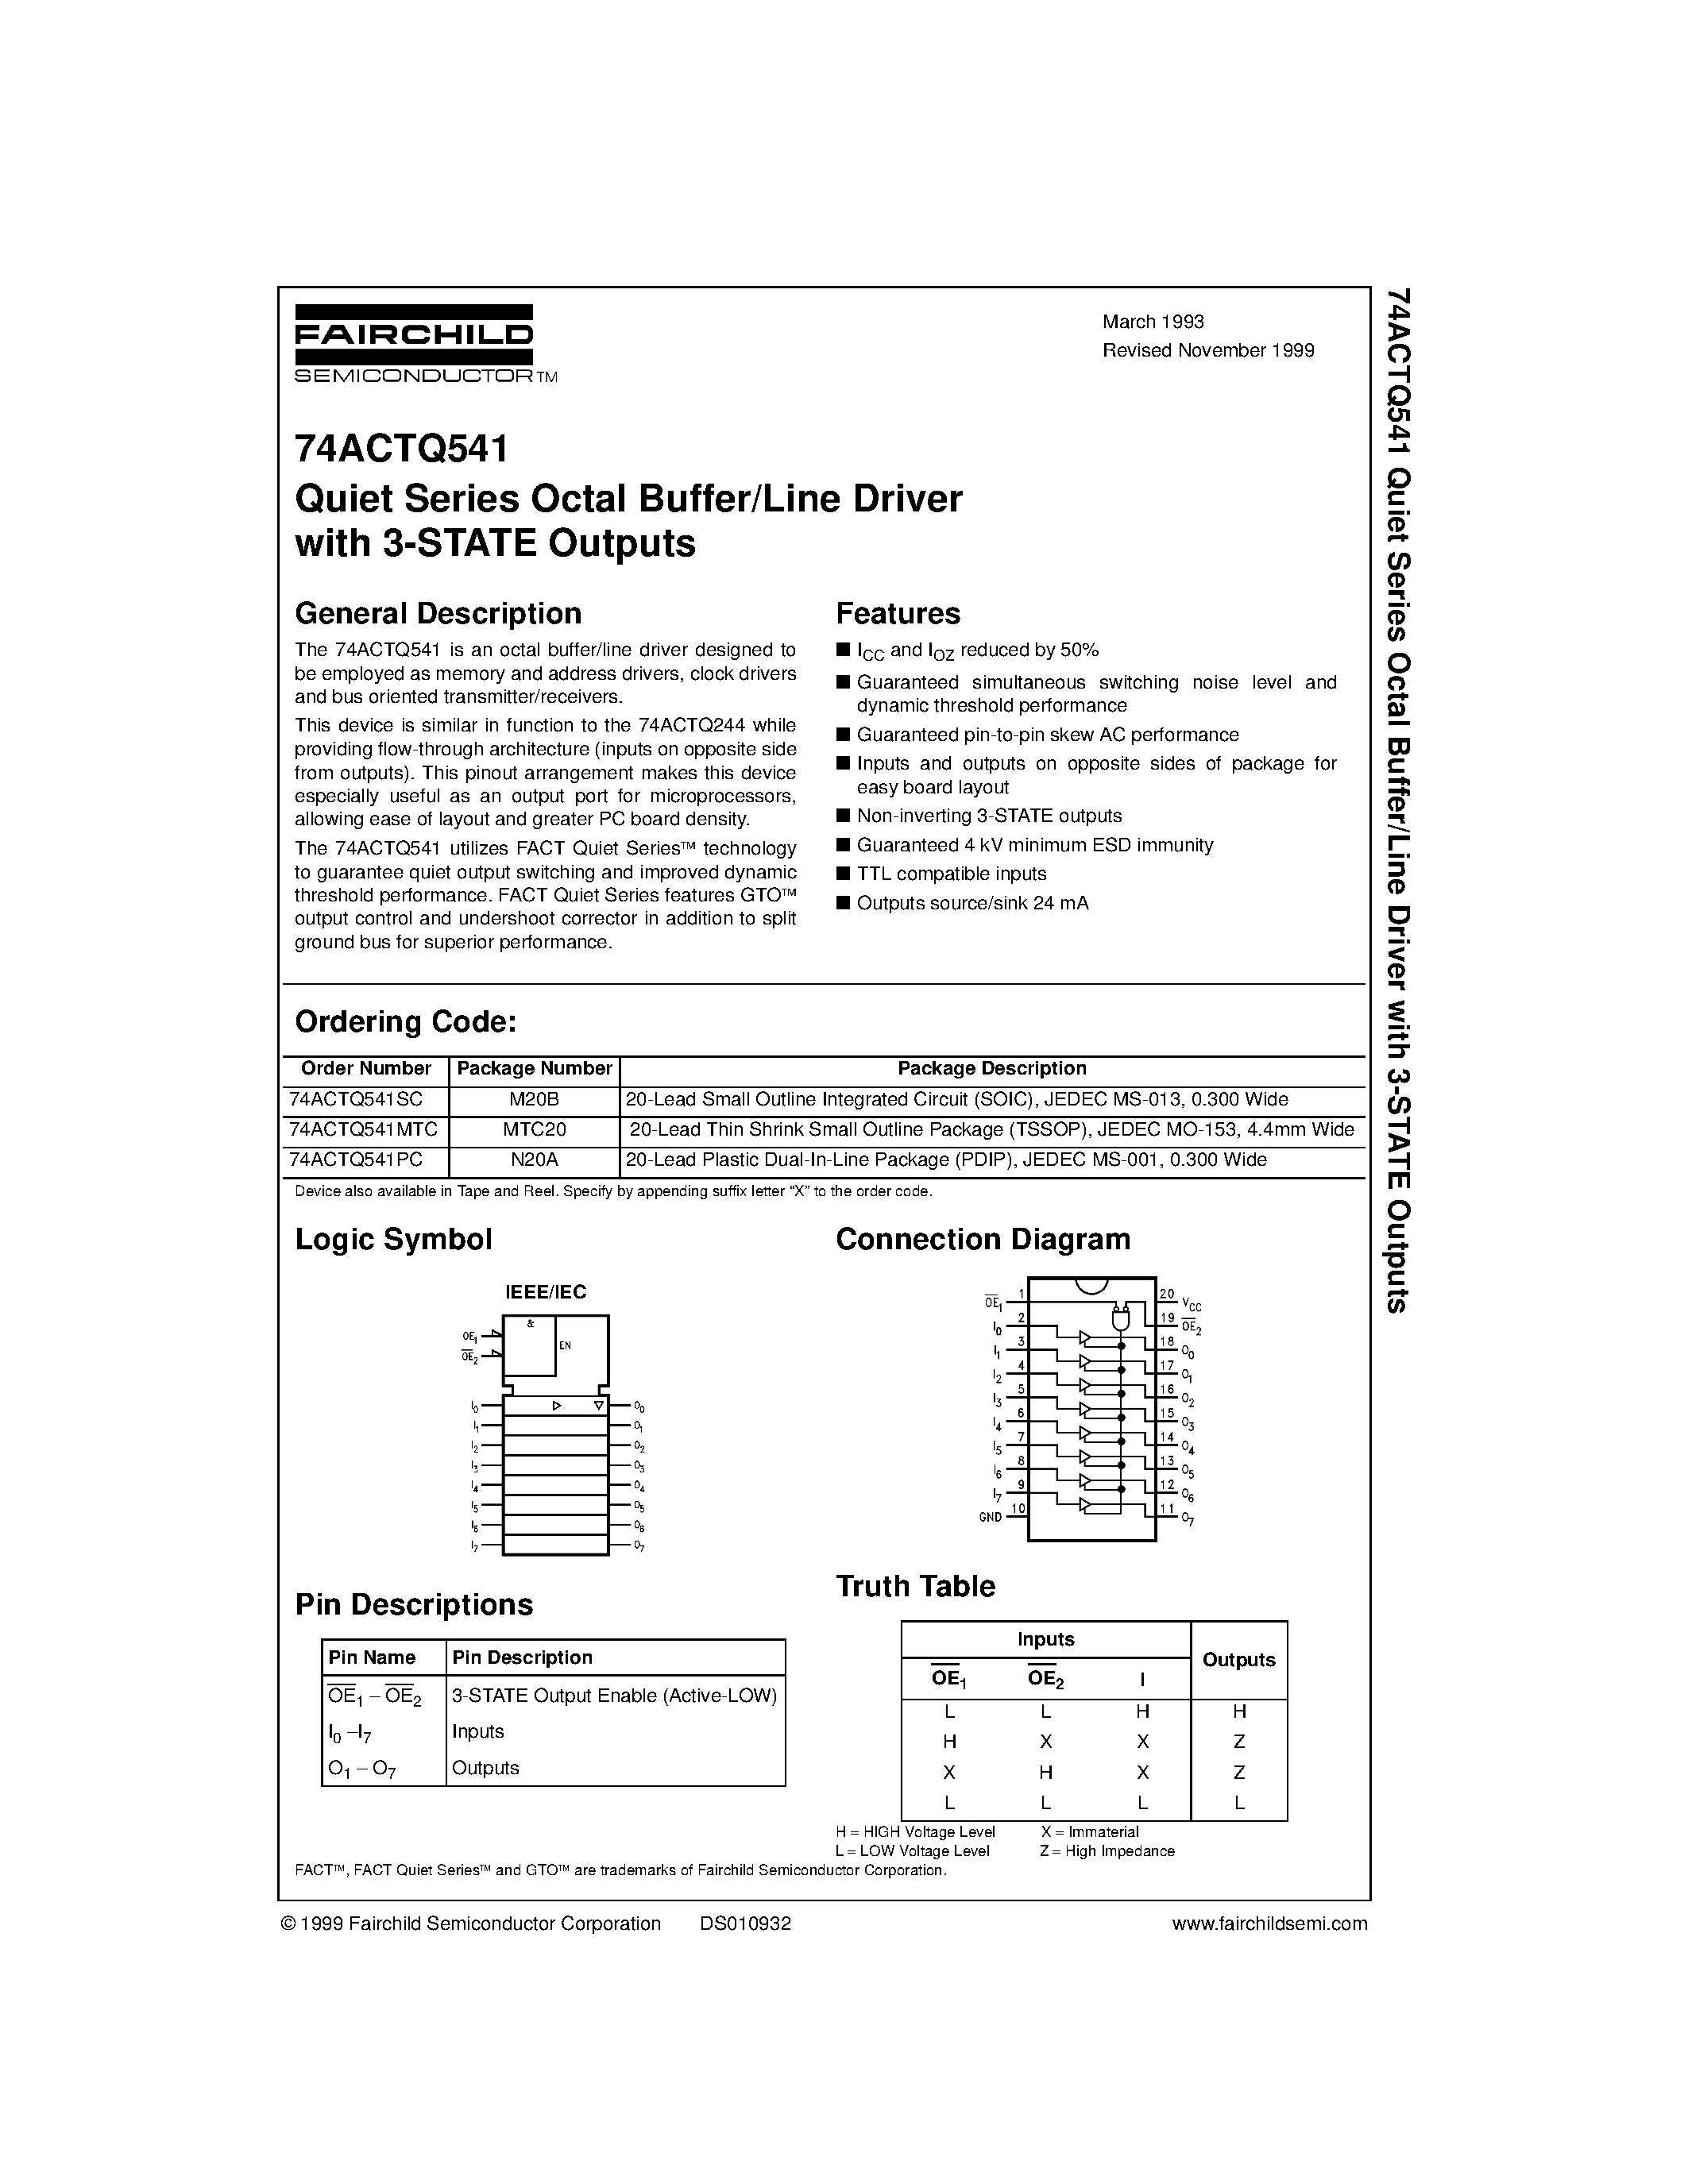 Datasheet 74ACTQ541SC - Quiet Series Octal Buffer/Line Driver with 3-STATE Outputs page 1